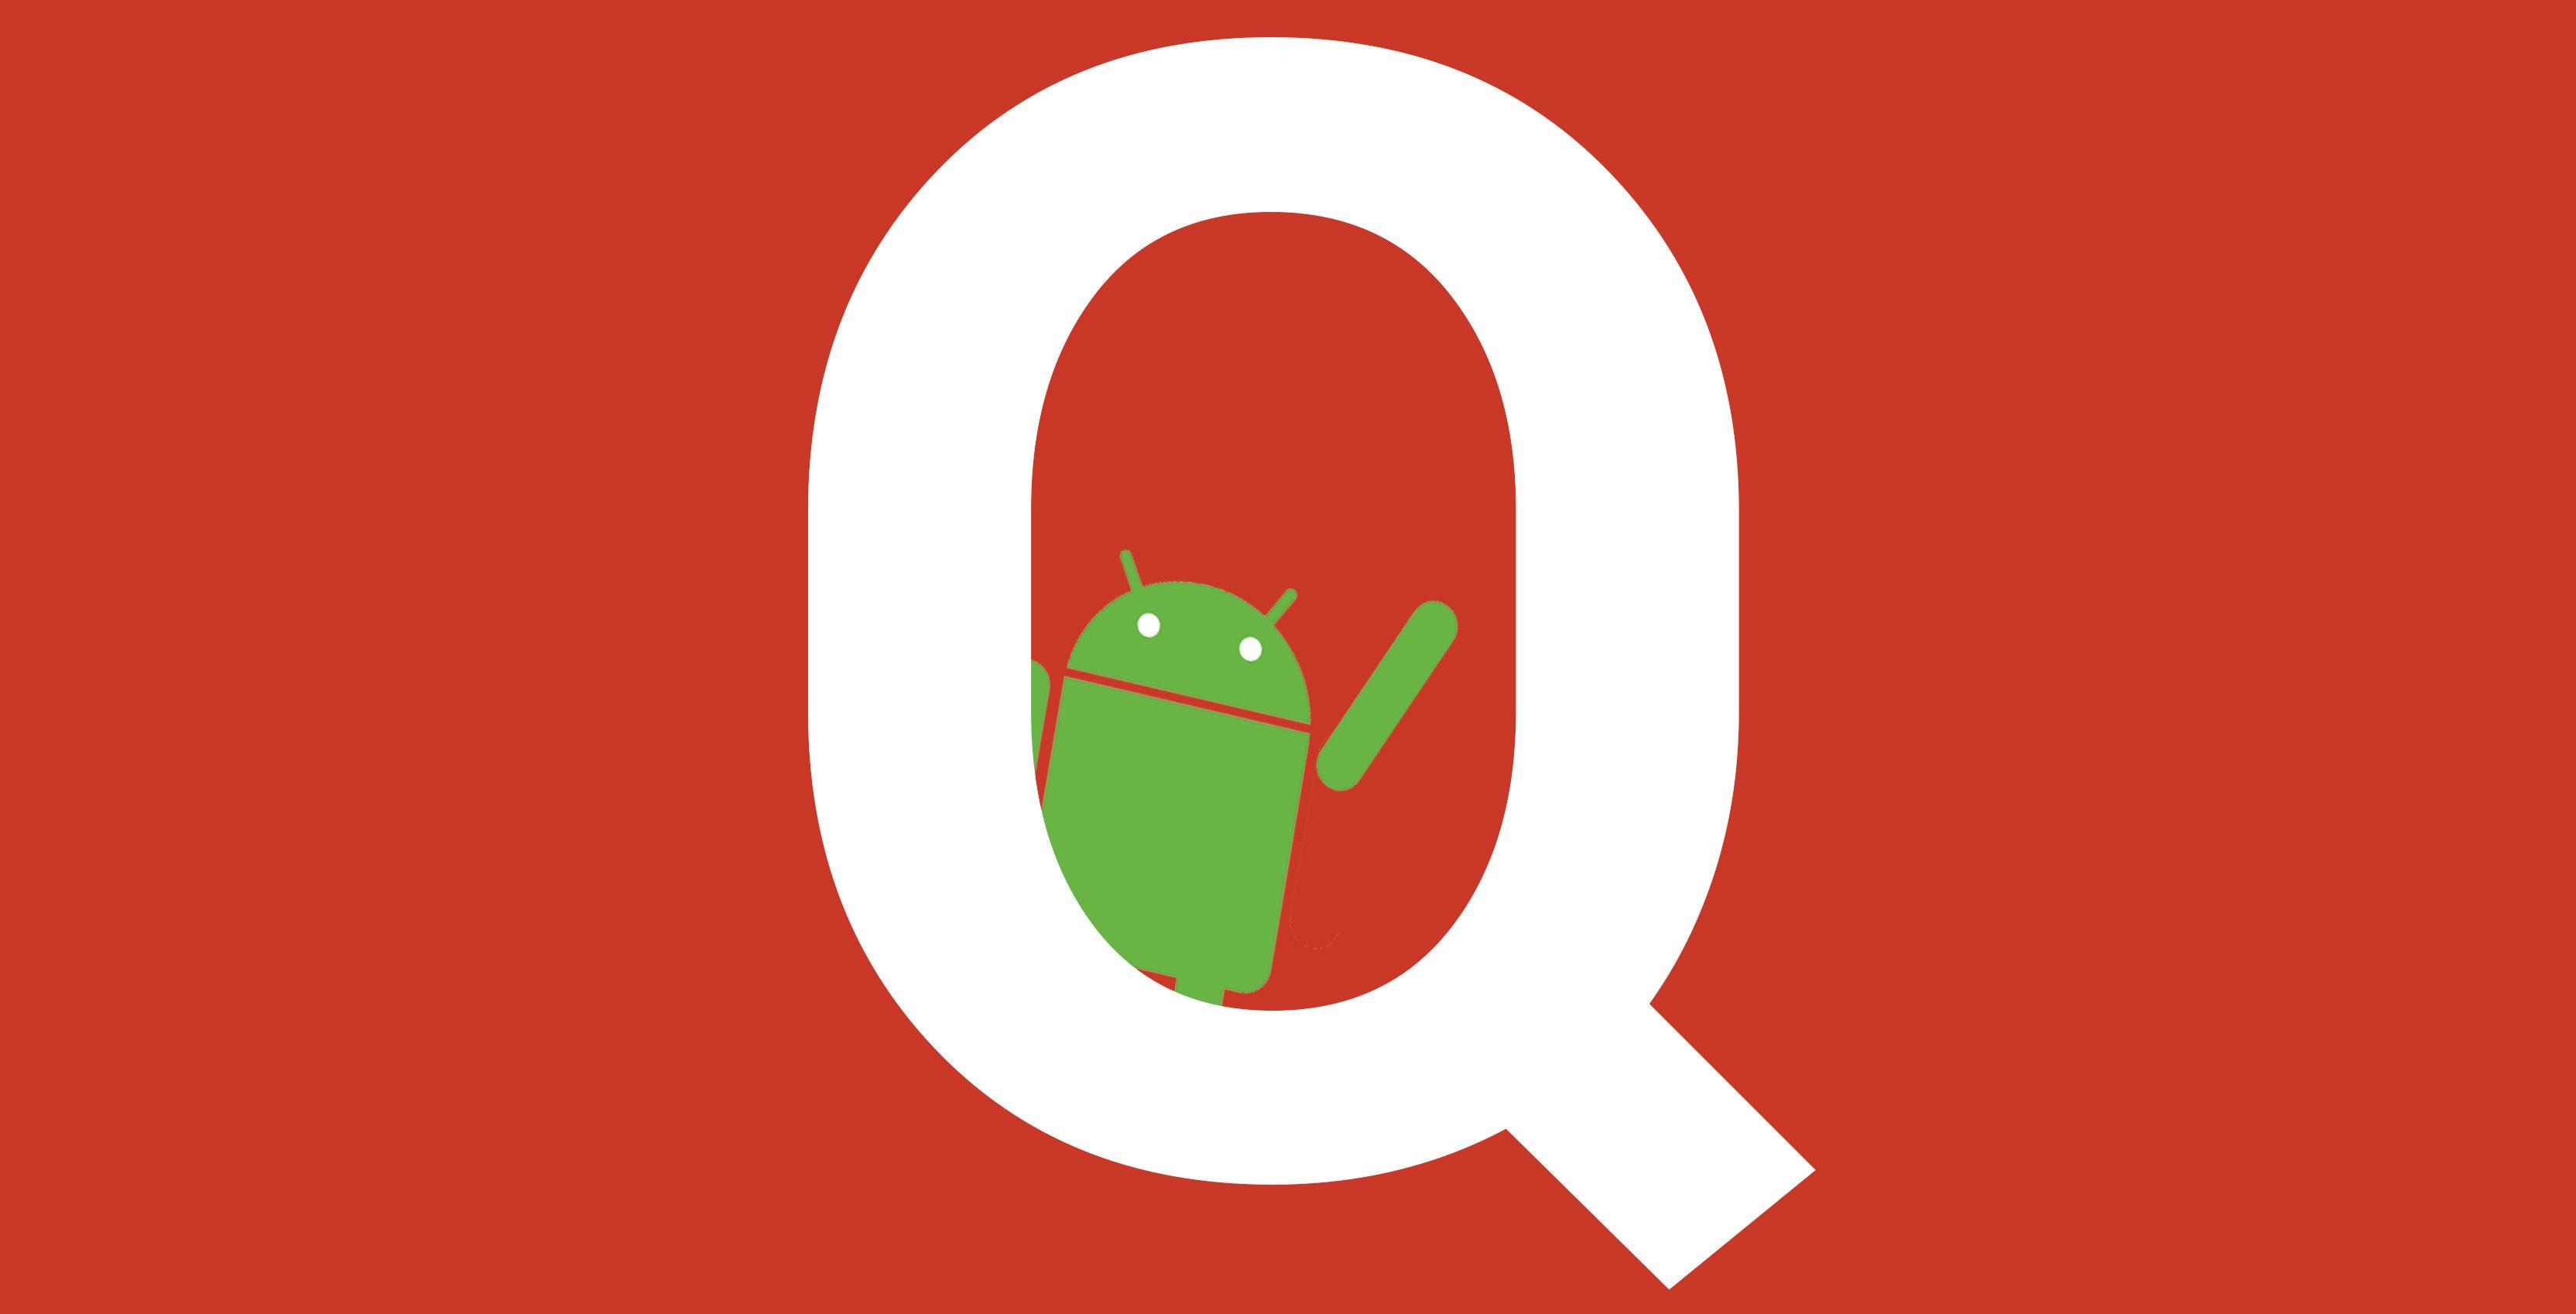 Red Open Q Logo - Android Q could bring more options for carriers to lock phones